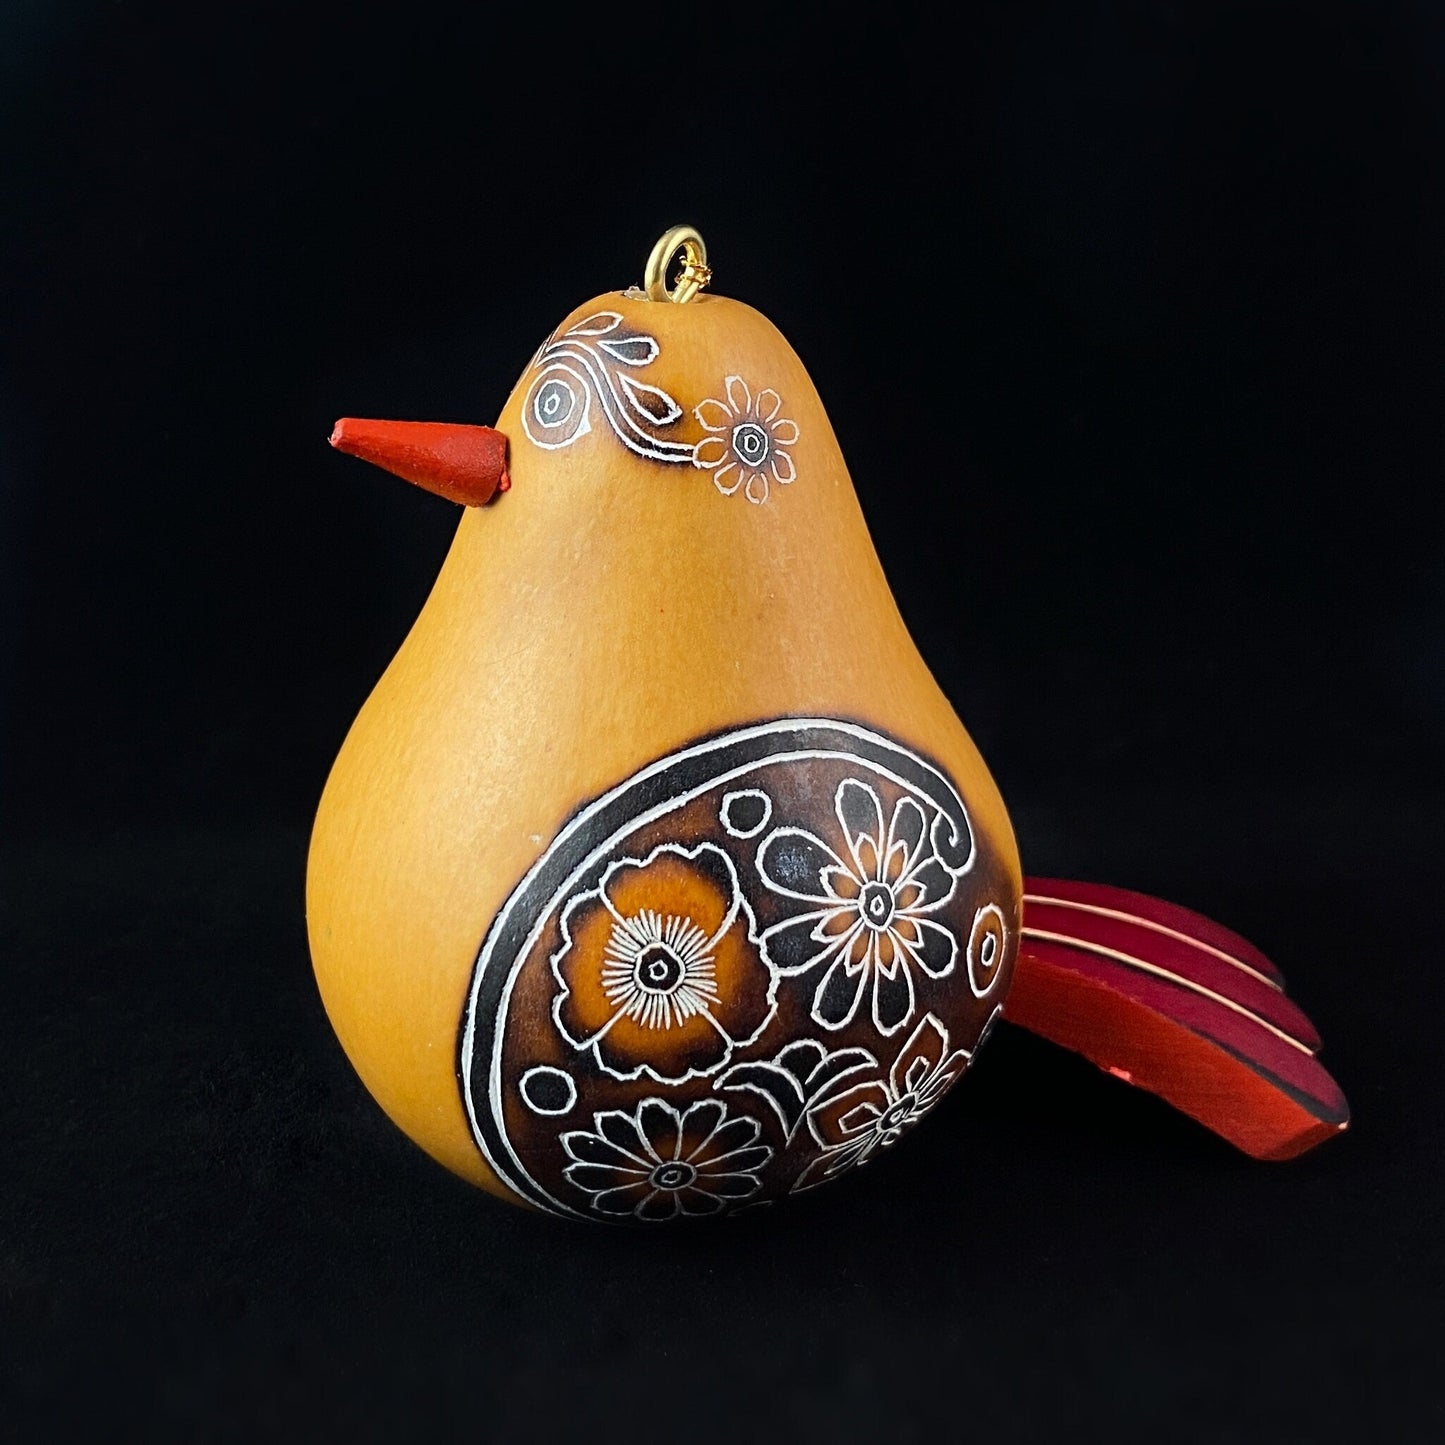 Decorative Yellow Bird Ornament/Maraca - Hand-Carved and Hand Painted Peruvian Gourd